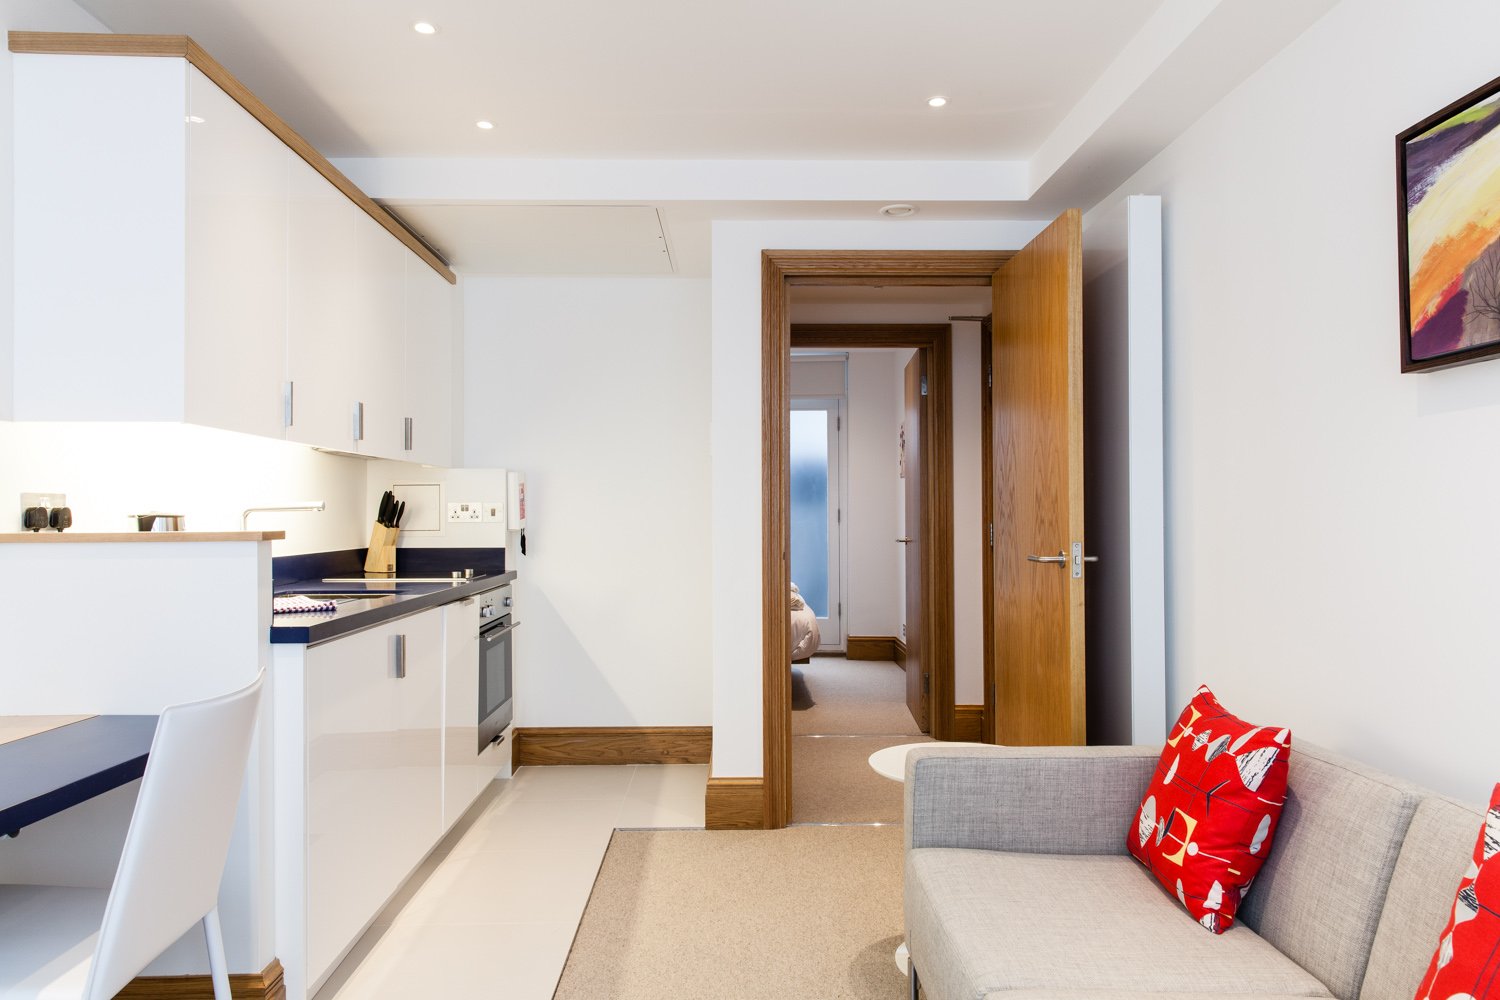 Serviced-Apartments-Covent-Garden---Willoughby-Street-Available-Now!-Book-Cheap-Serviced-Apartments-in-the-heart-of-Central-London-I-Free-Wi-Fi-|-Urban-Stay